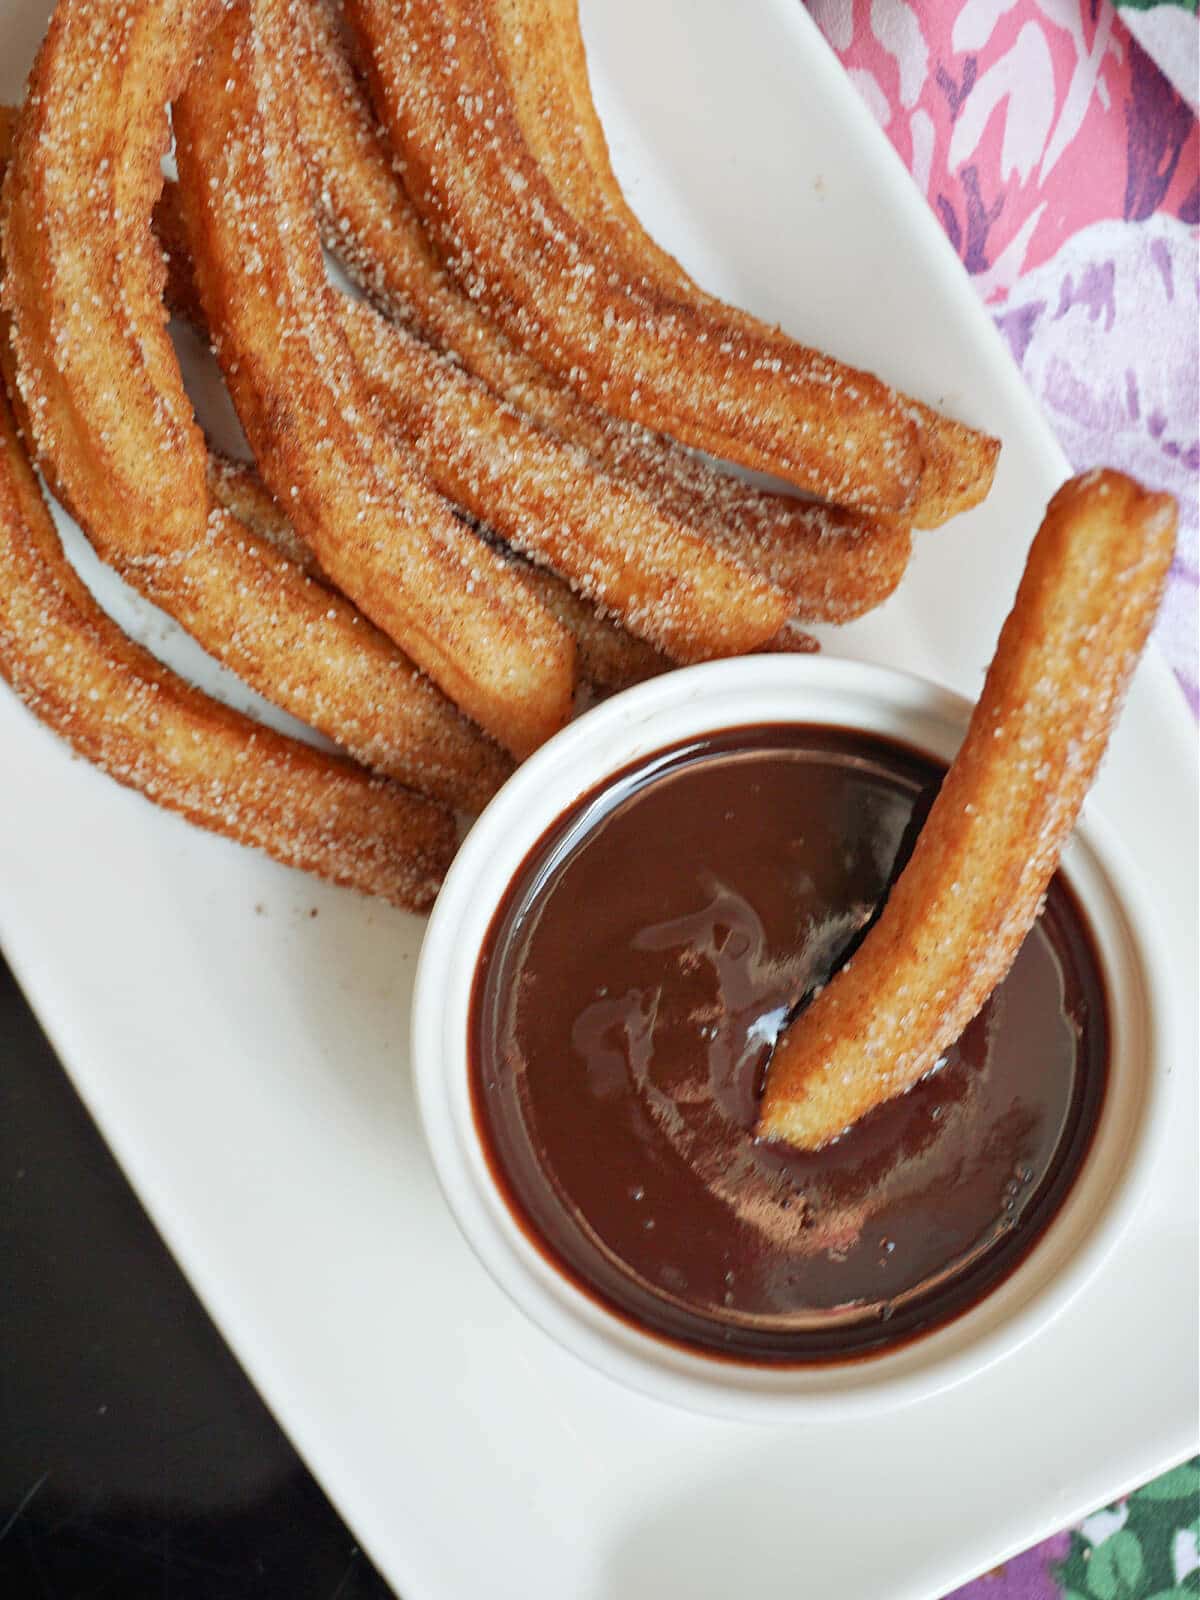 A ramekin with a churro being dipped in chocolate sauce and churros on a white plate.